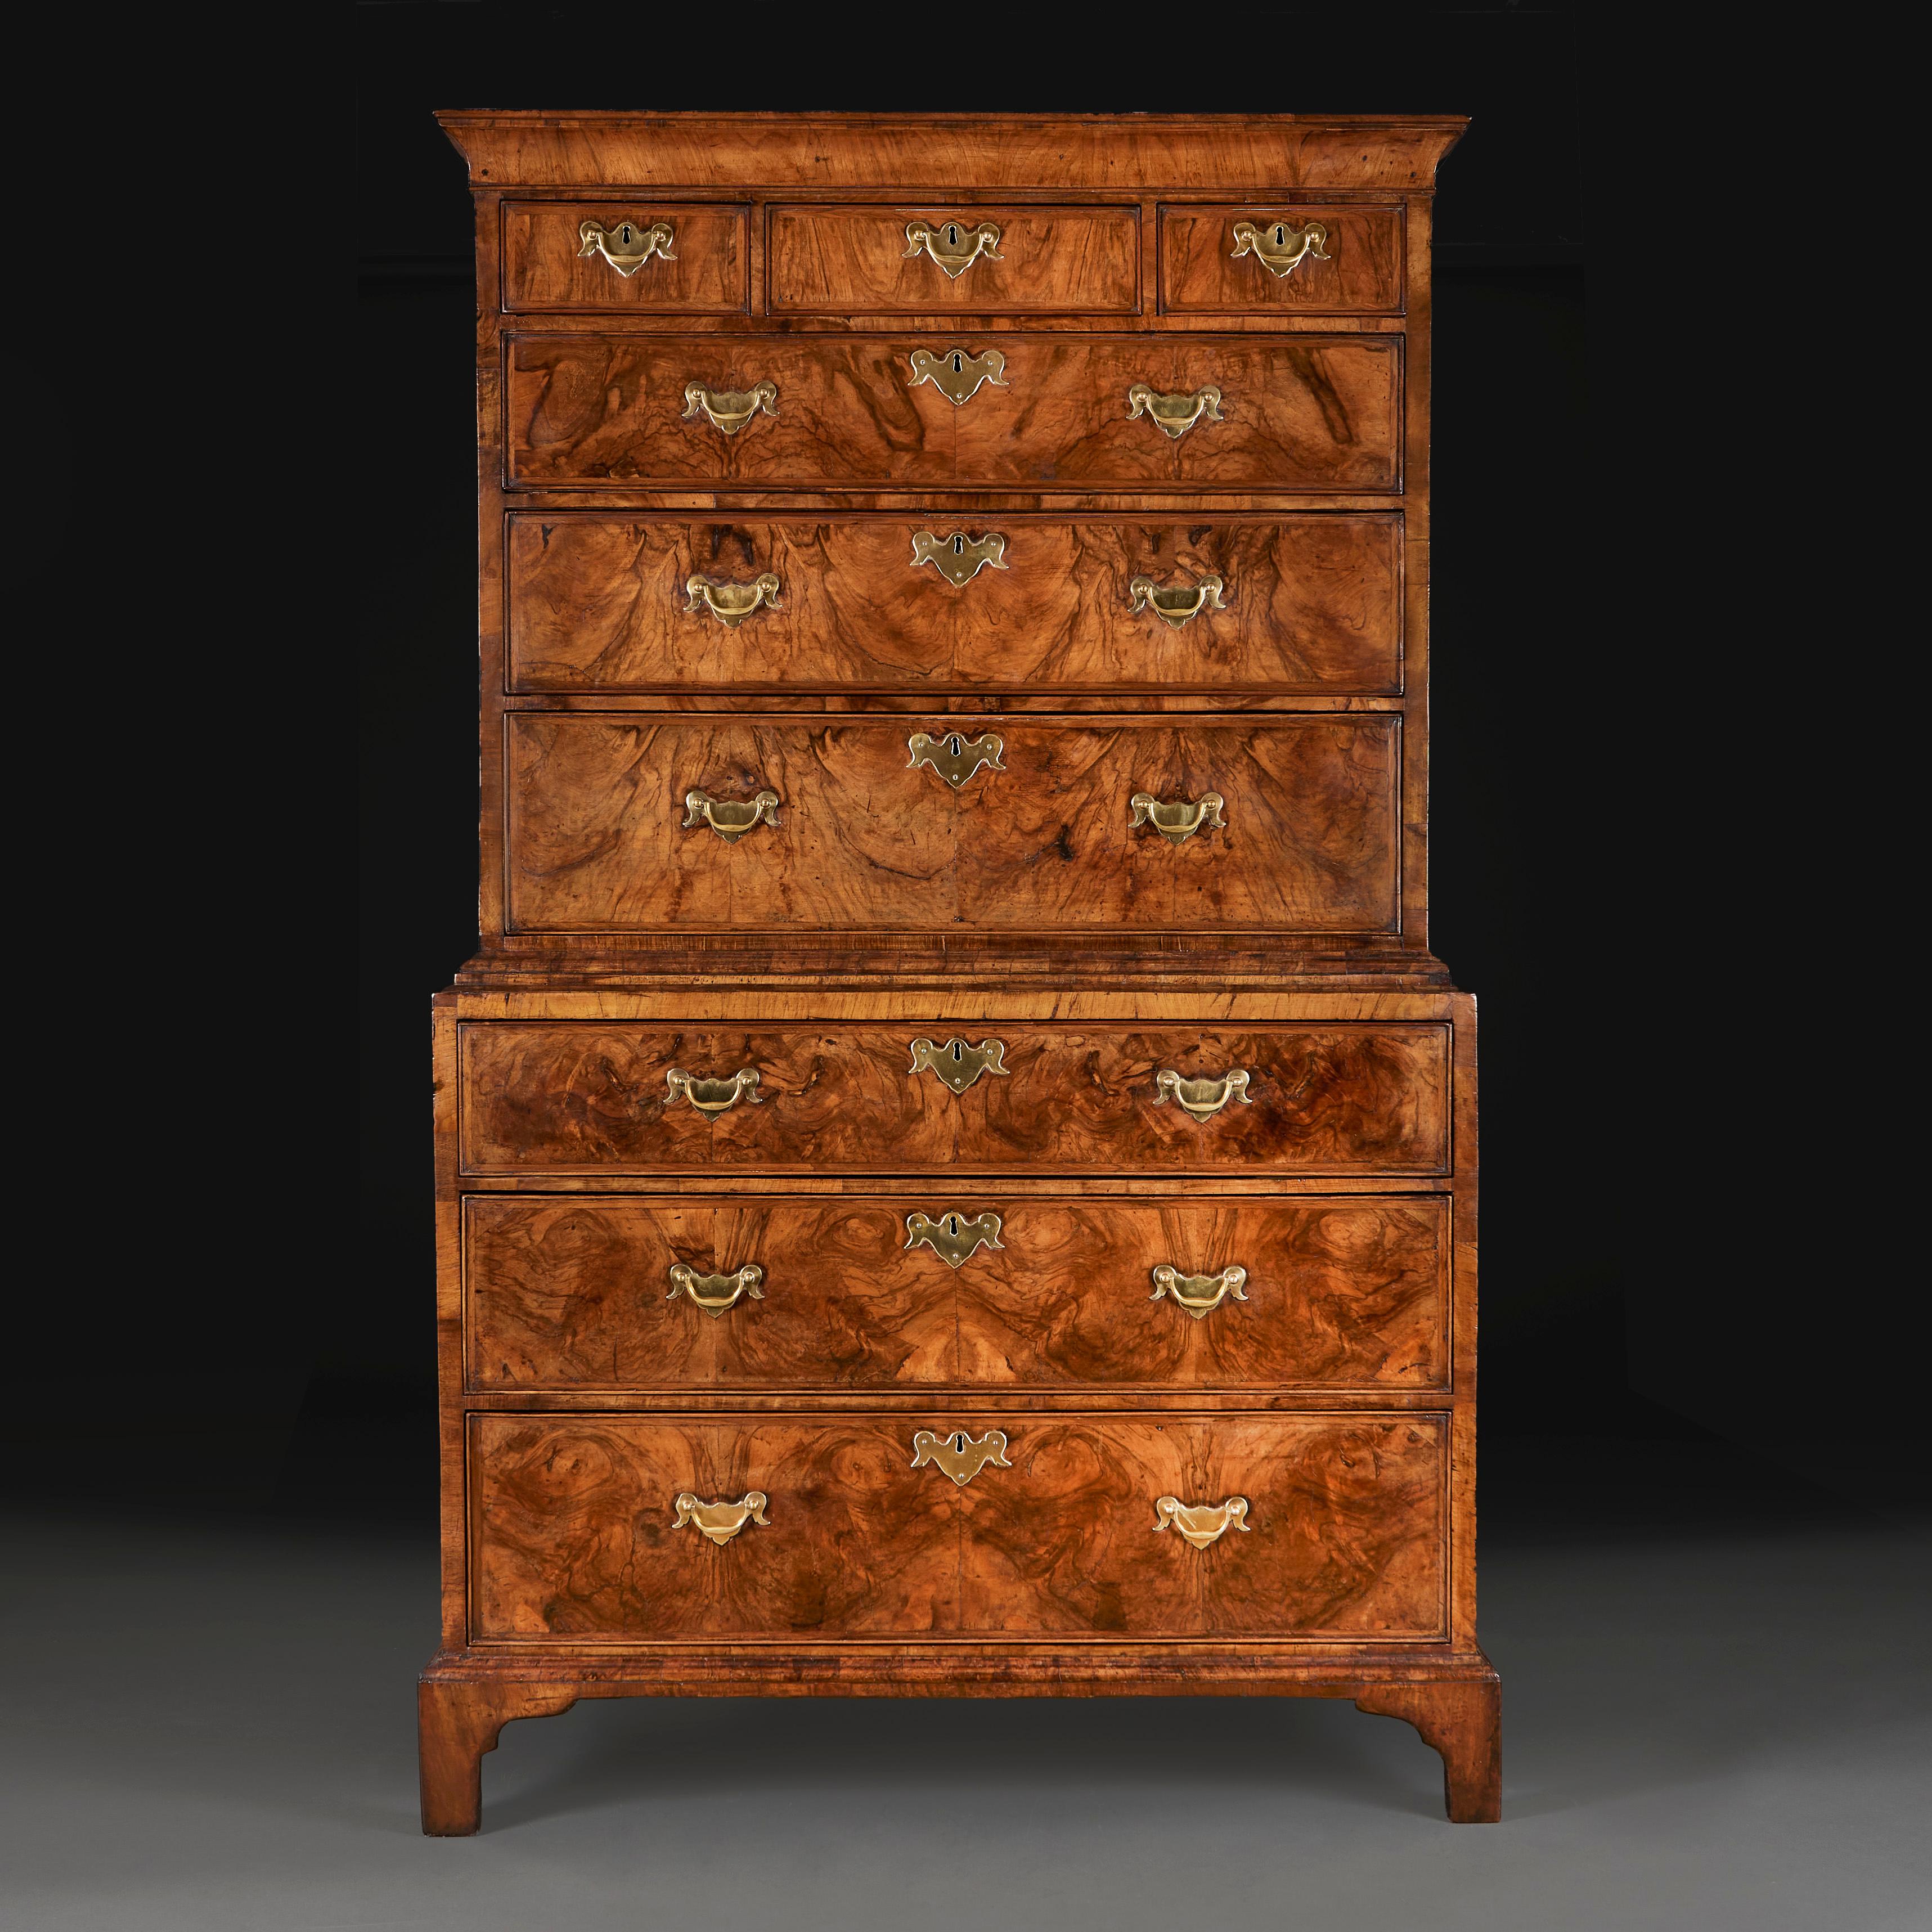 England, circa 1740.

A fine George II walnut chest on chest, with original brass escutcheons and handles, the top with concave moulded cornice above three short and three long graduated drawers, the base opening with three further long drawers, all